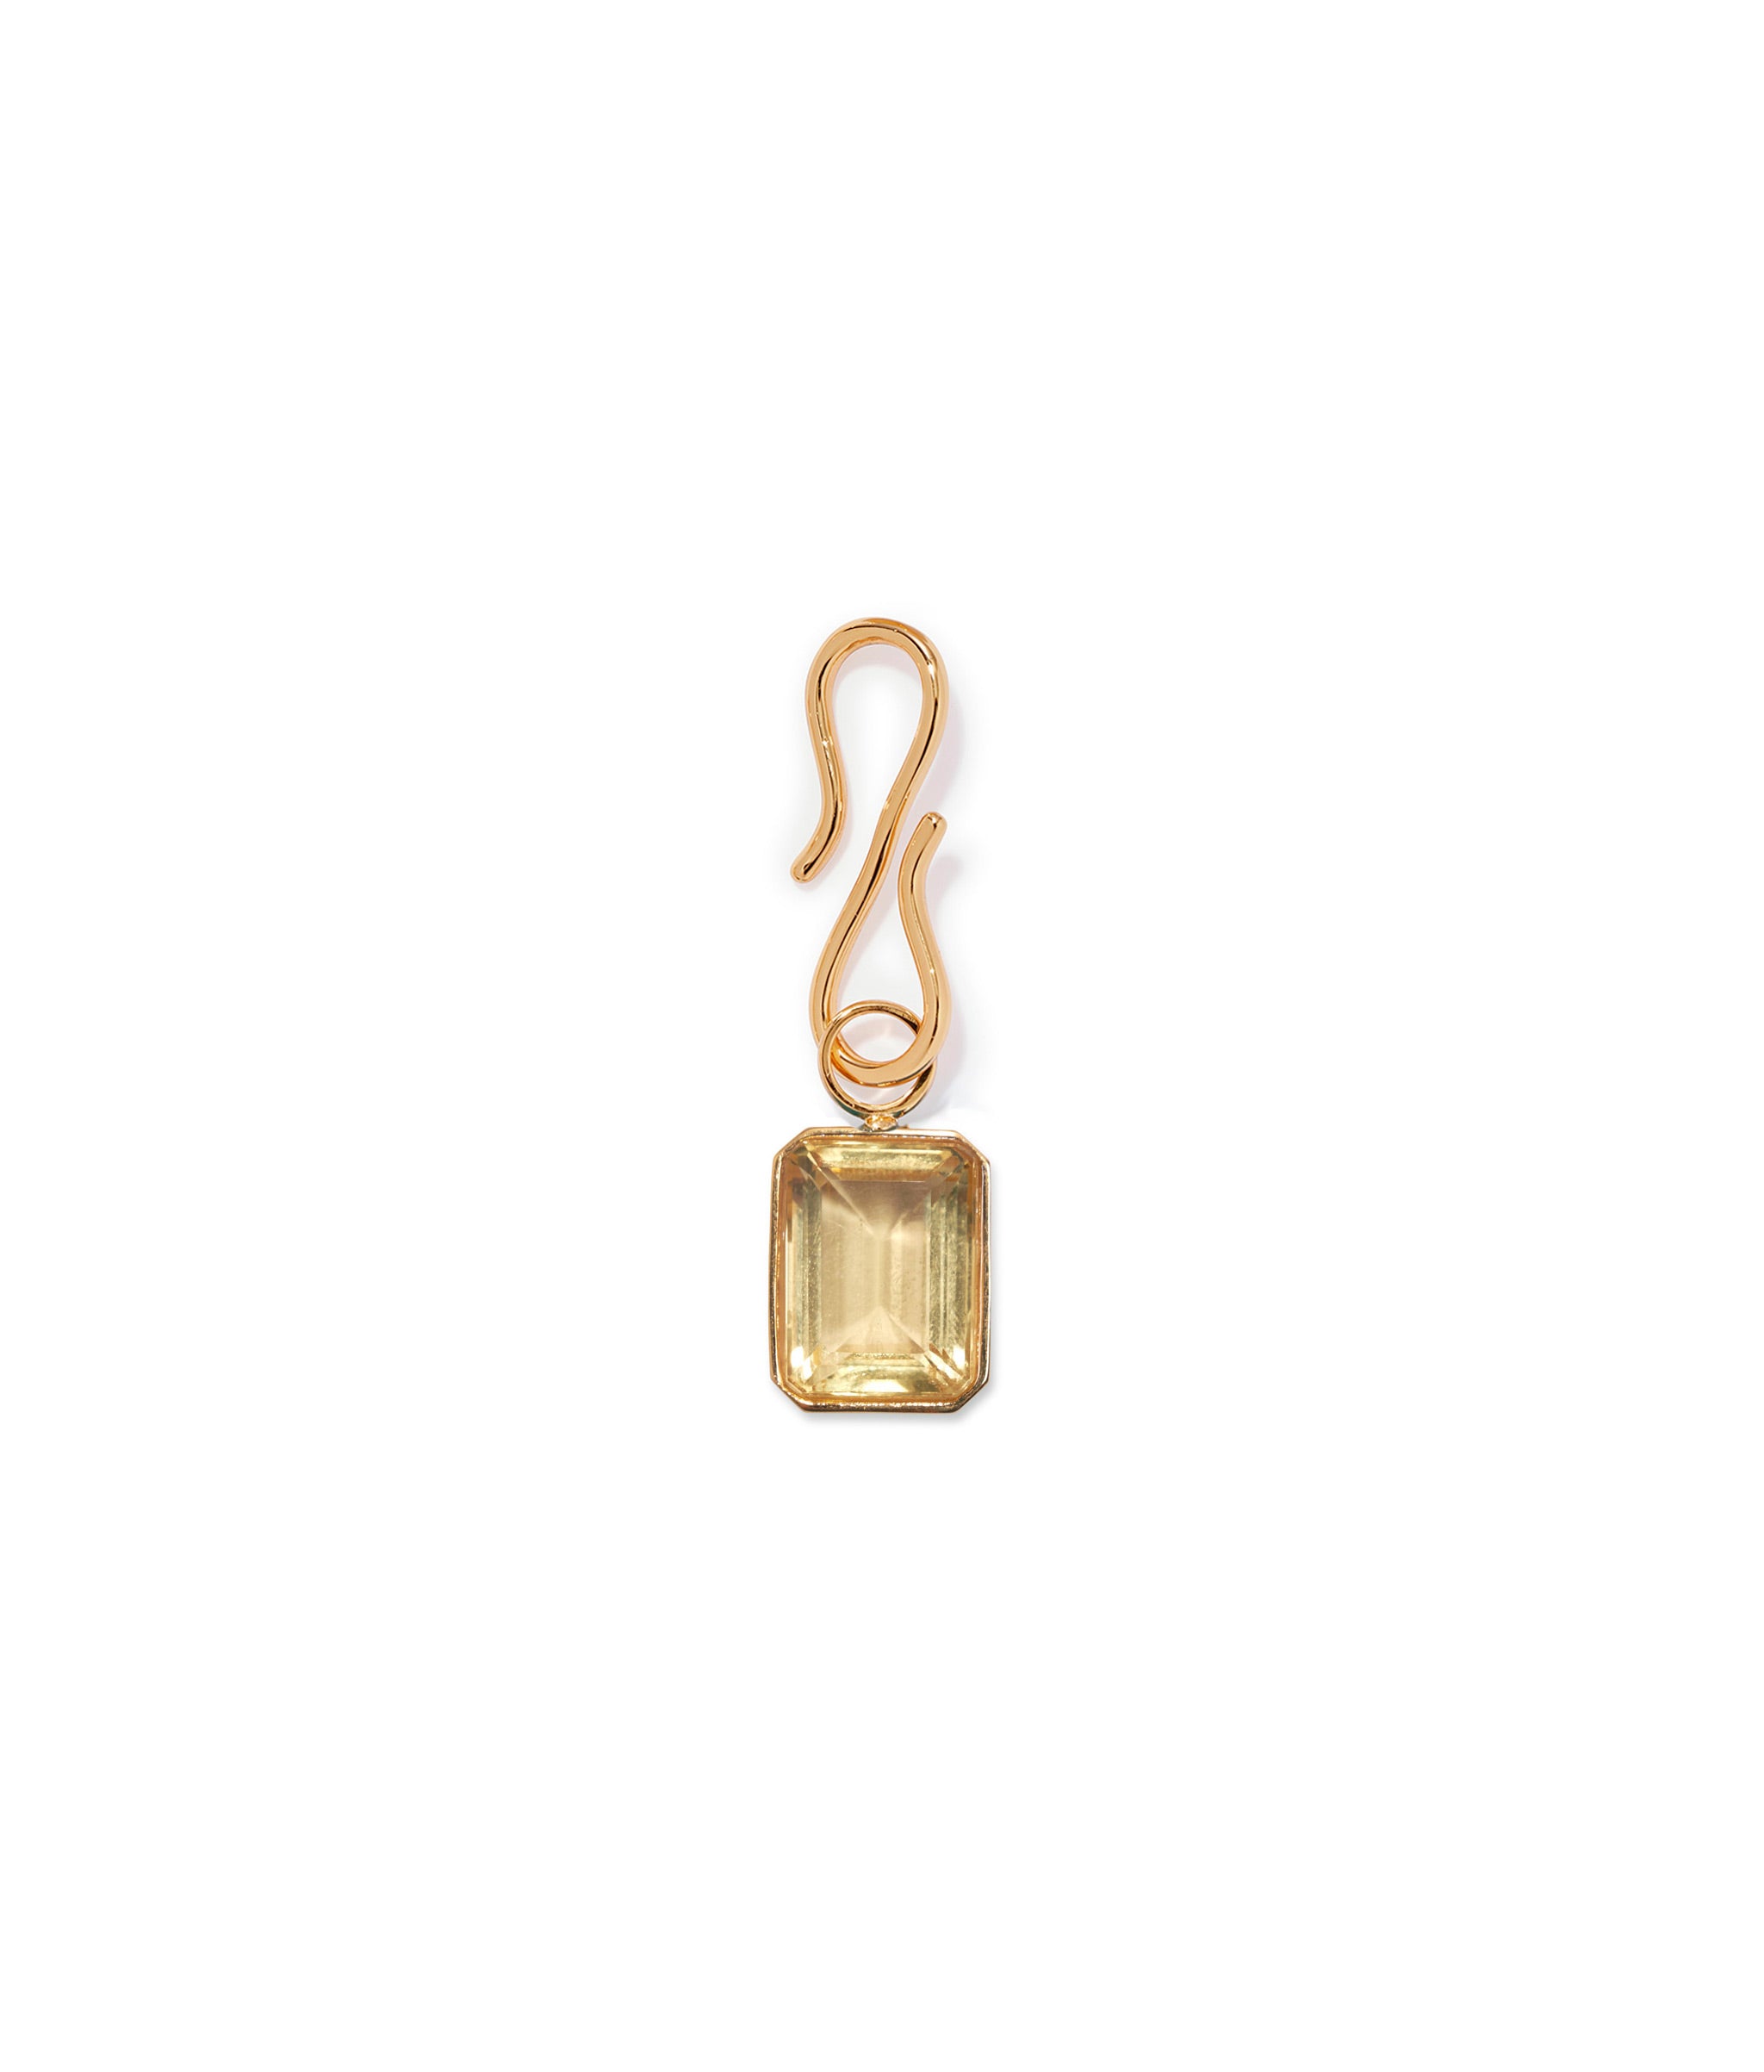 Candyland Charm in Lemon. Citrine quartz baguette charm with gold plated brass on S-hook.